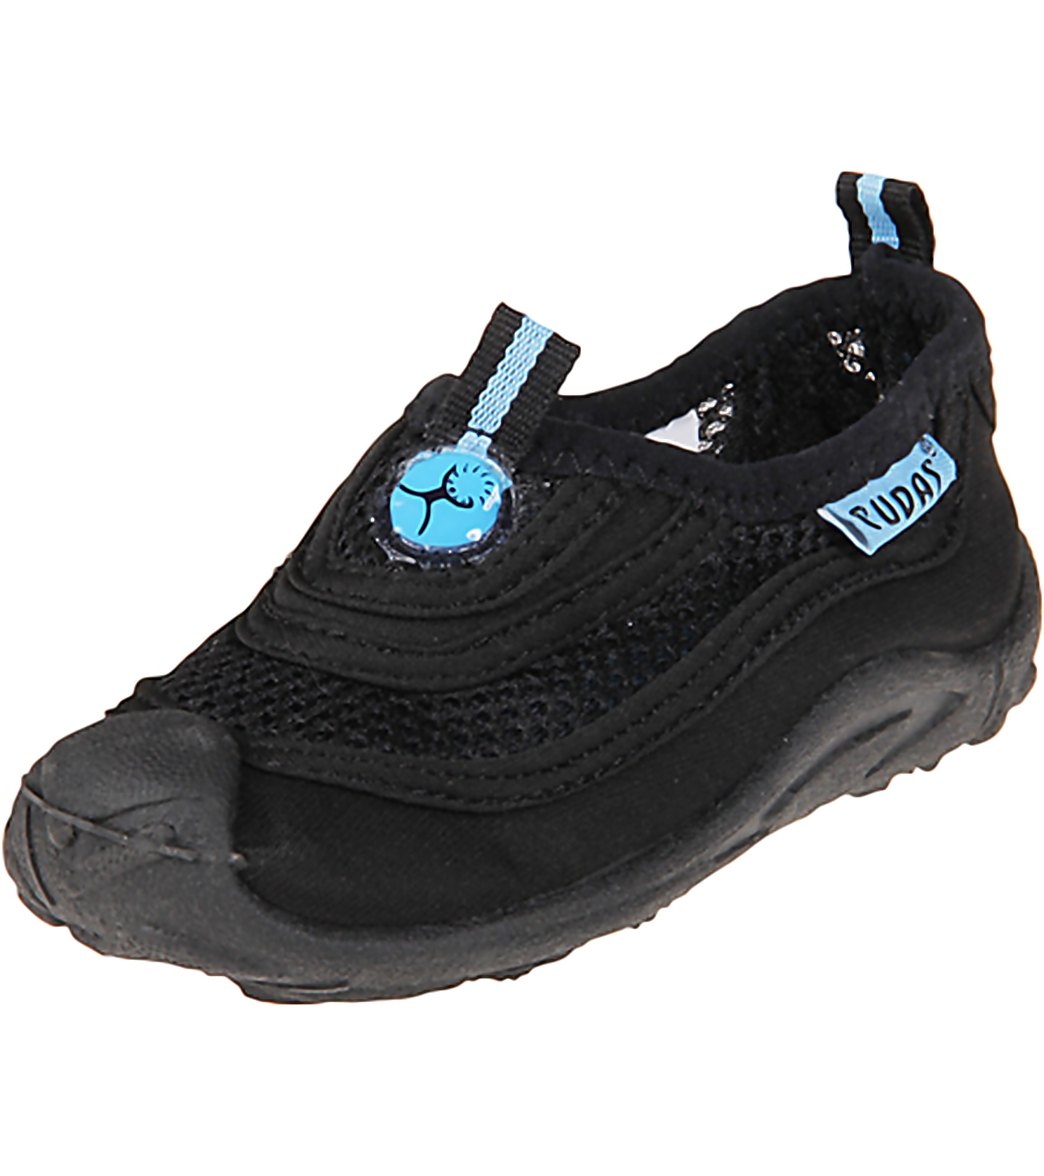 Cudas Youth Flatwater Watershoes - Black 11 - Swimoutlet.com